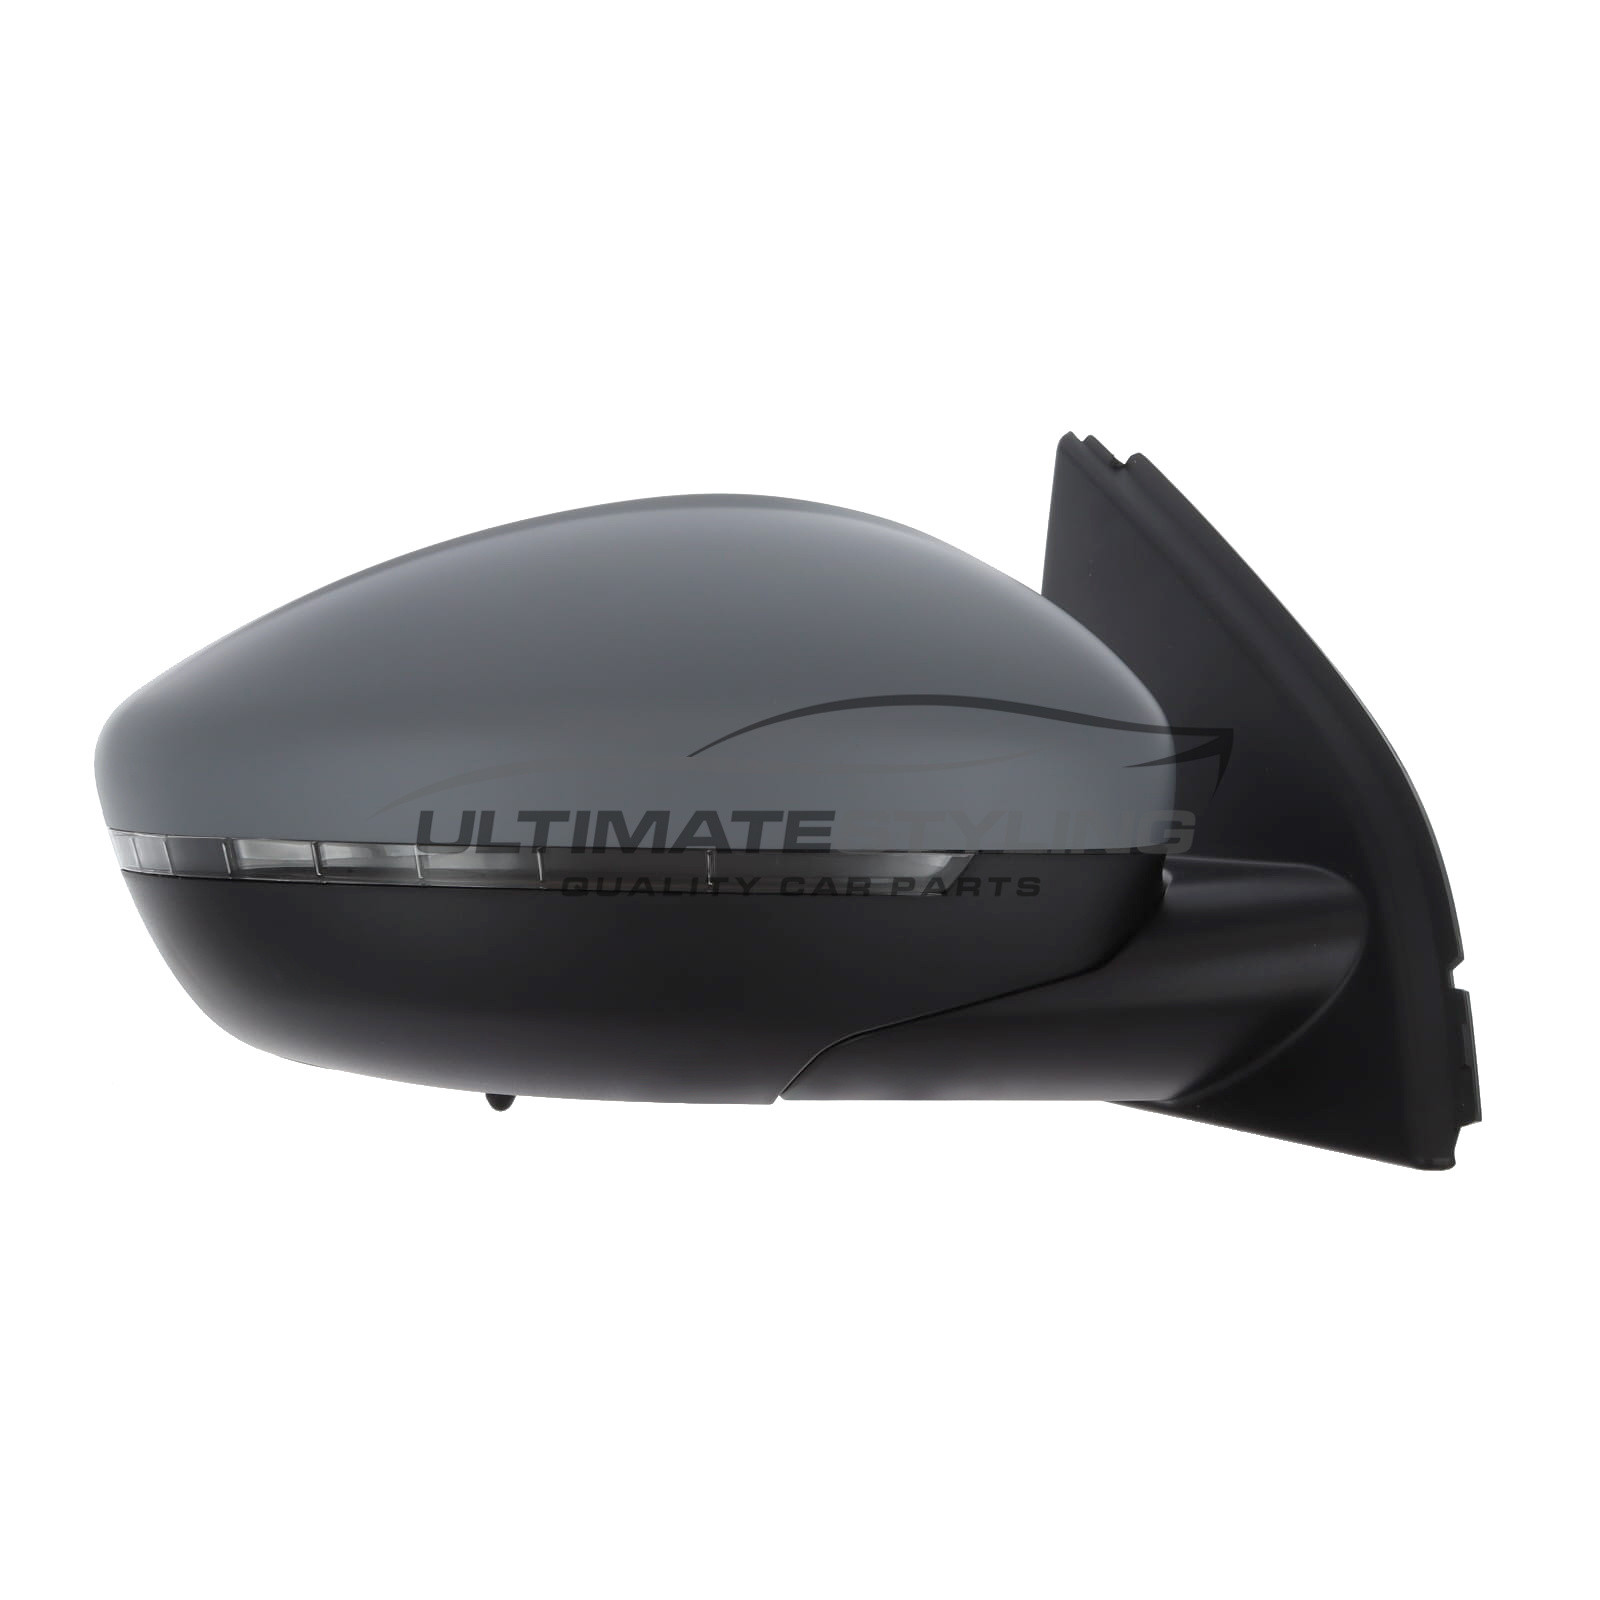 Peugeot 308 Wing Mirror / Door Mirror - Drivers Side (RH) - Electric adjustment - Heated Glass - Power Folding - Indicator - Puddle Light - Temperature Sensor - Primed